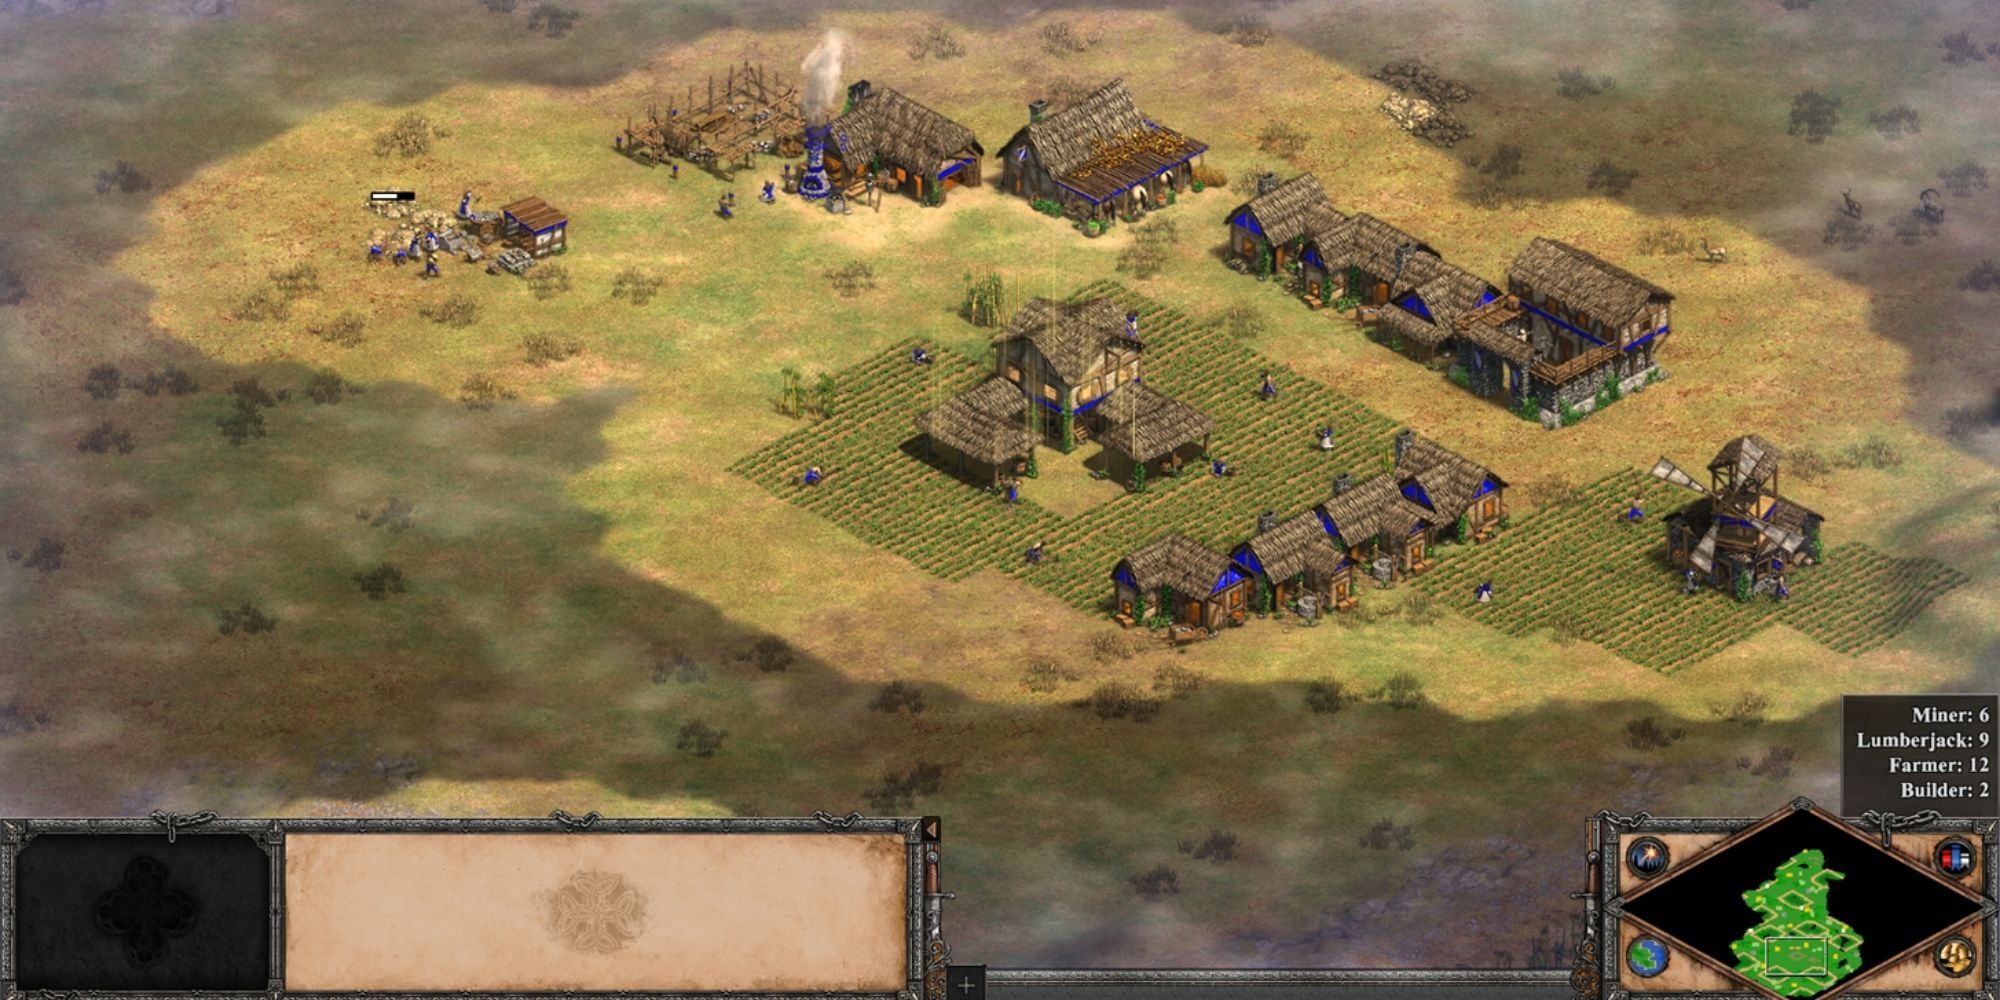 A Knight Rush in Progress During the Feudal Age in Age of Empires 2